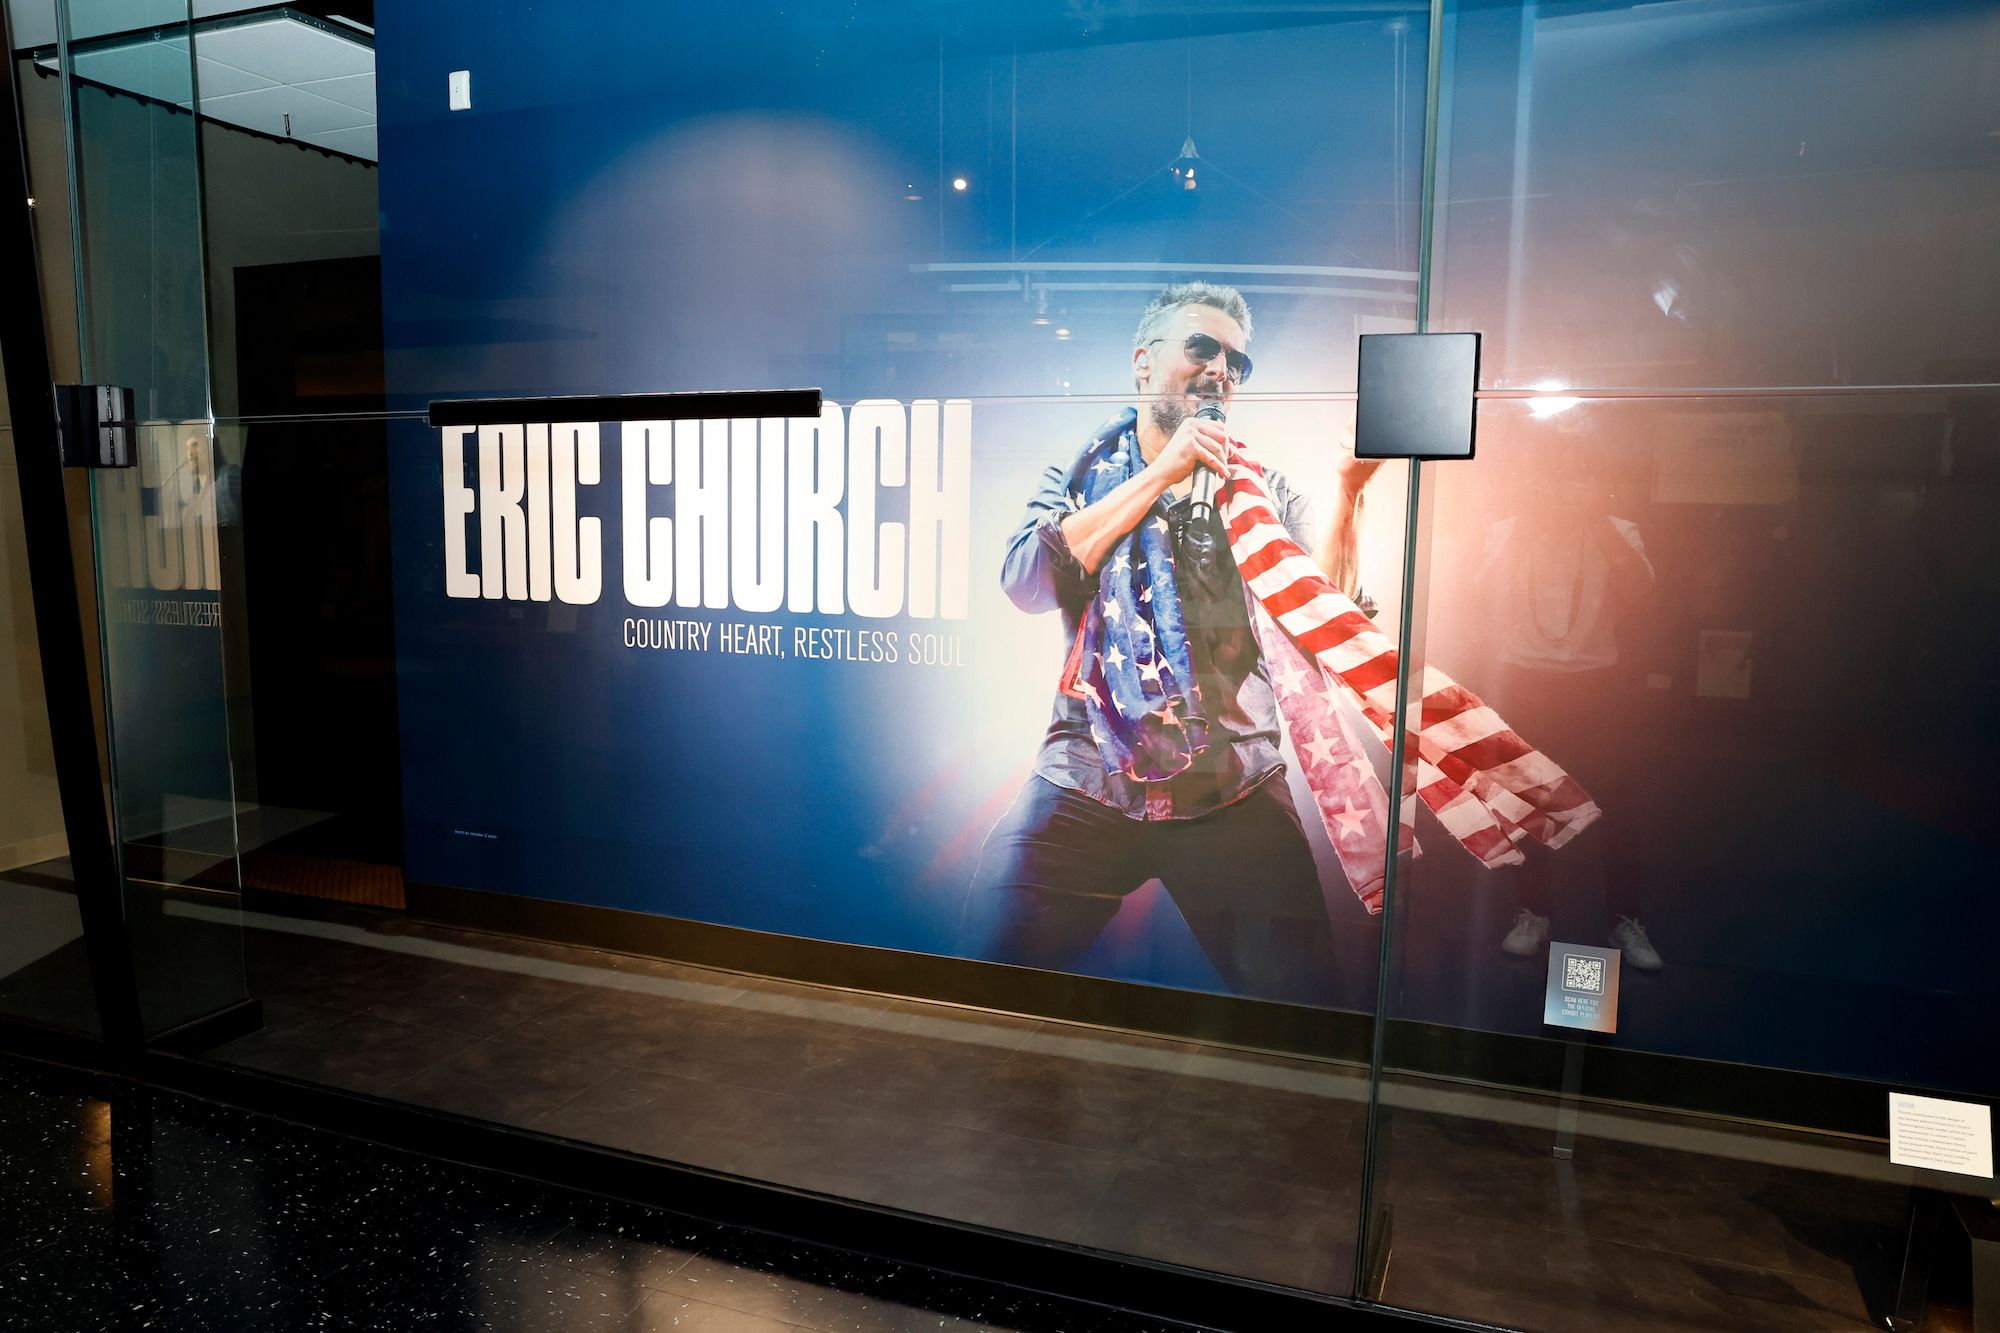 The Country Music Hall of Fame and Museum's new exhibit, Eric Church: Country Heart, Restless Soul, at Country Music Hall of Fame and Museum.